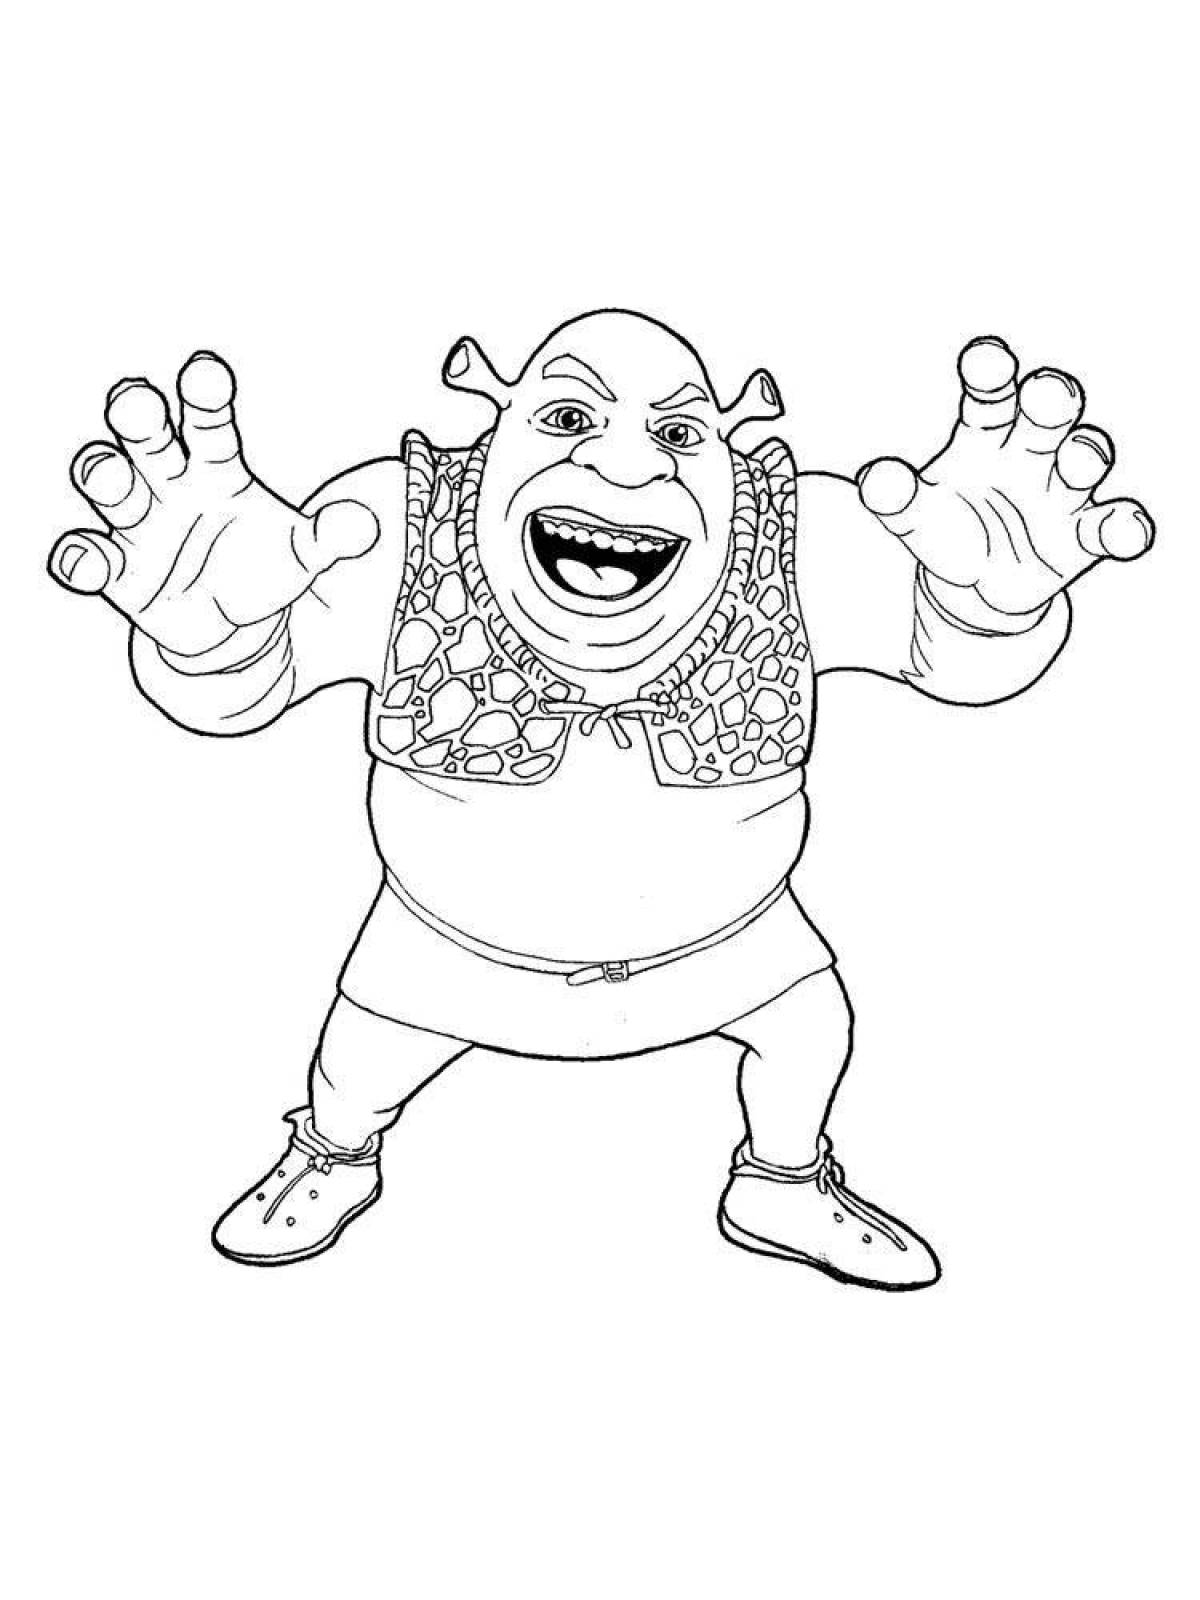 Shrek's adorable coloring page